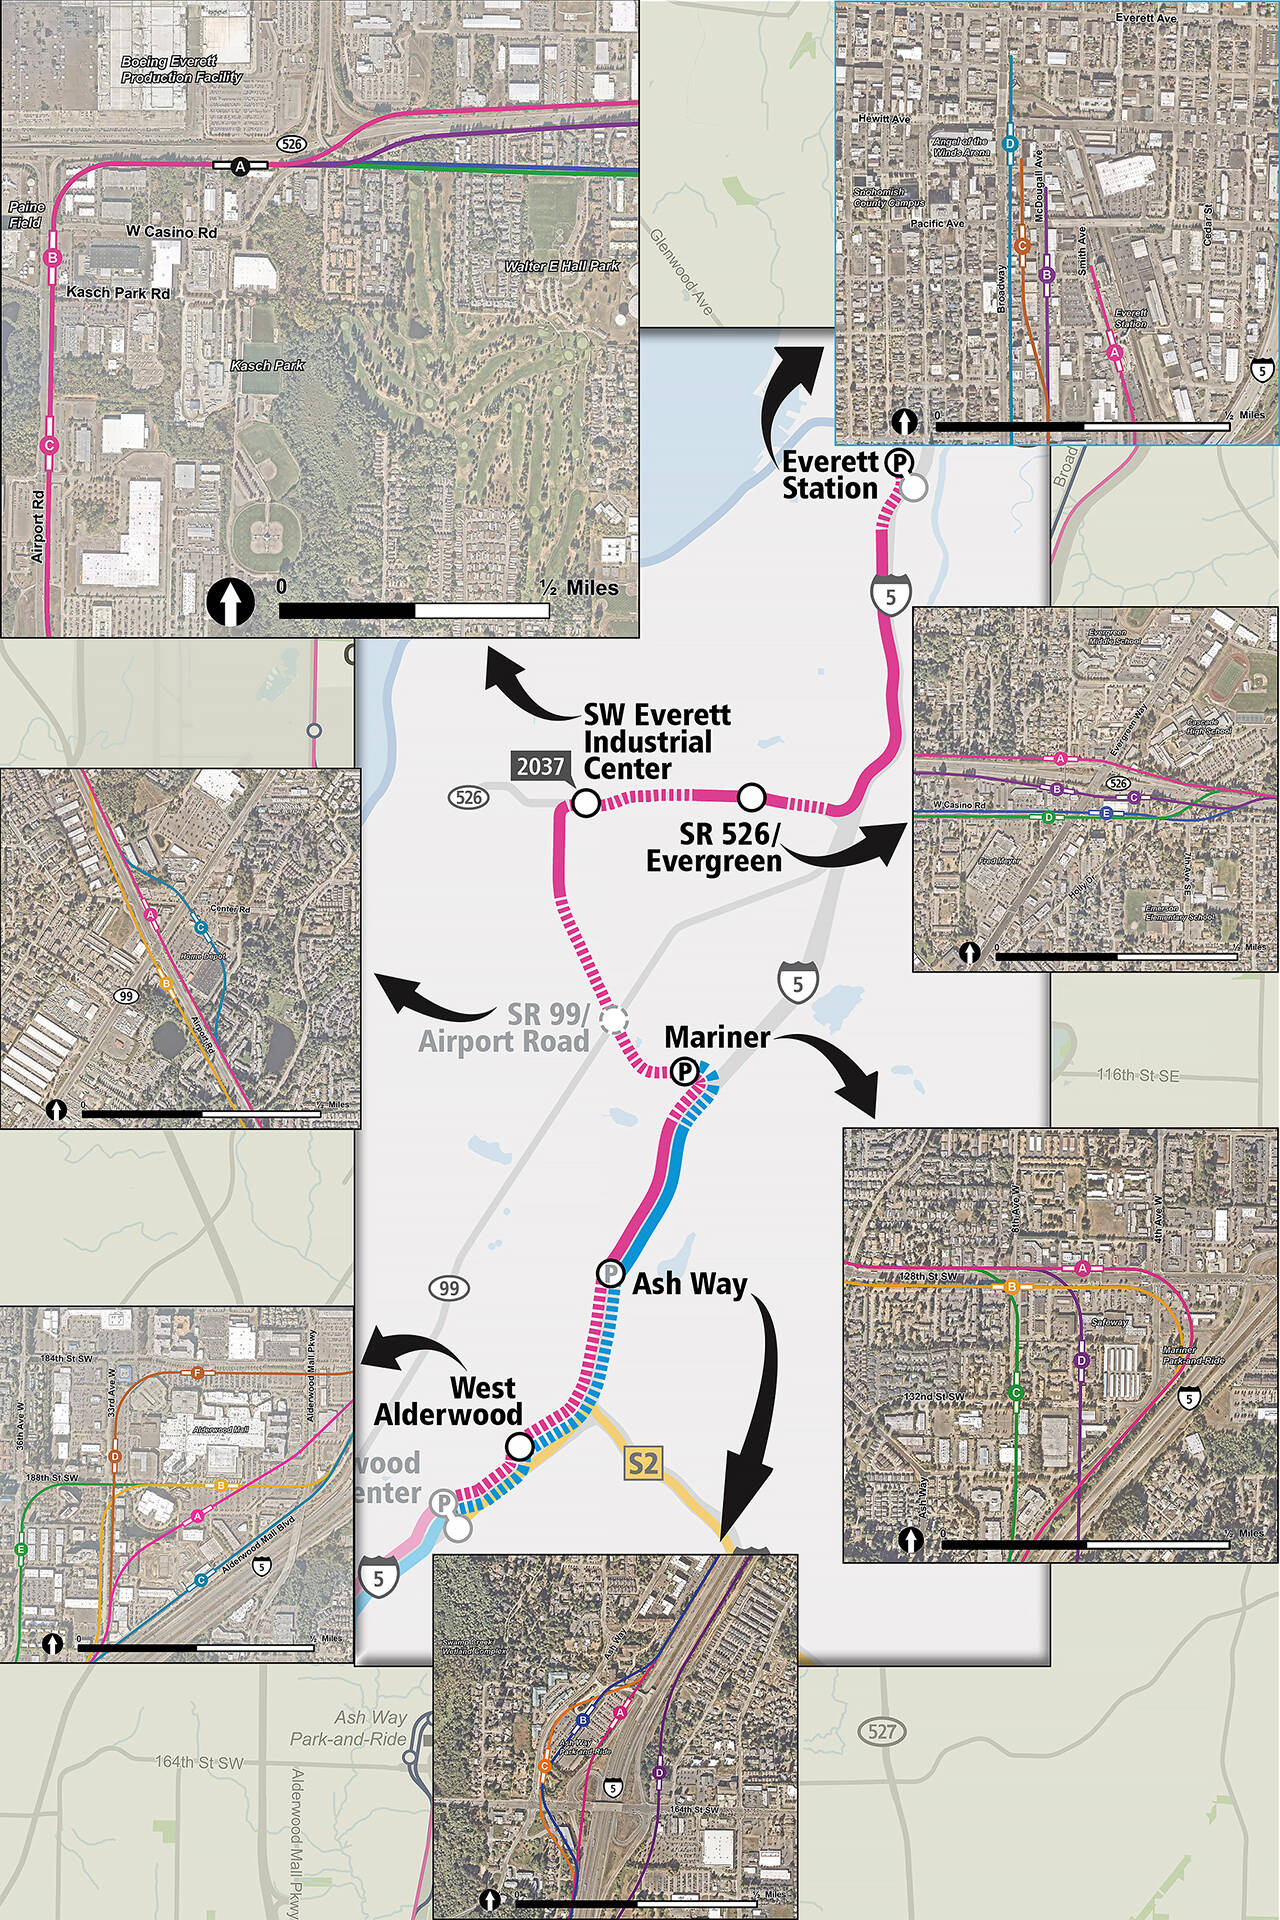 The Everett Link Extension will add 16 miles of light rail and six new stations connecting Snohomish County residents to the regional light rail network. (Sound Transit)